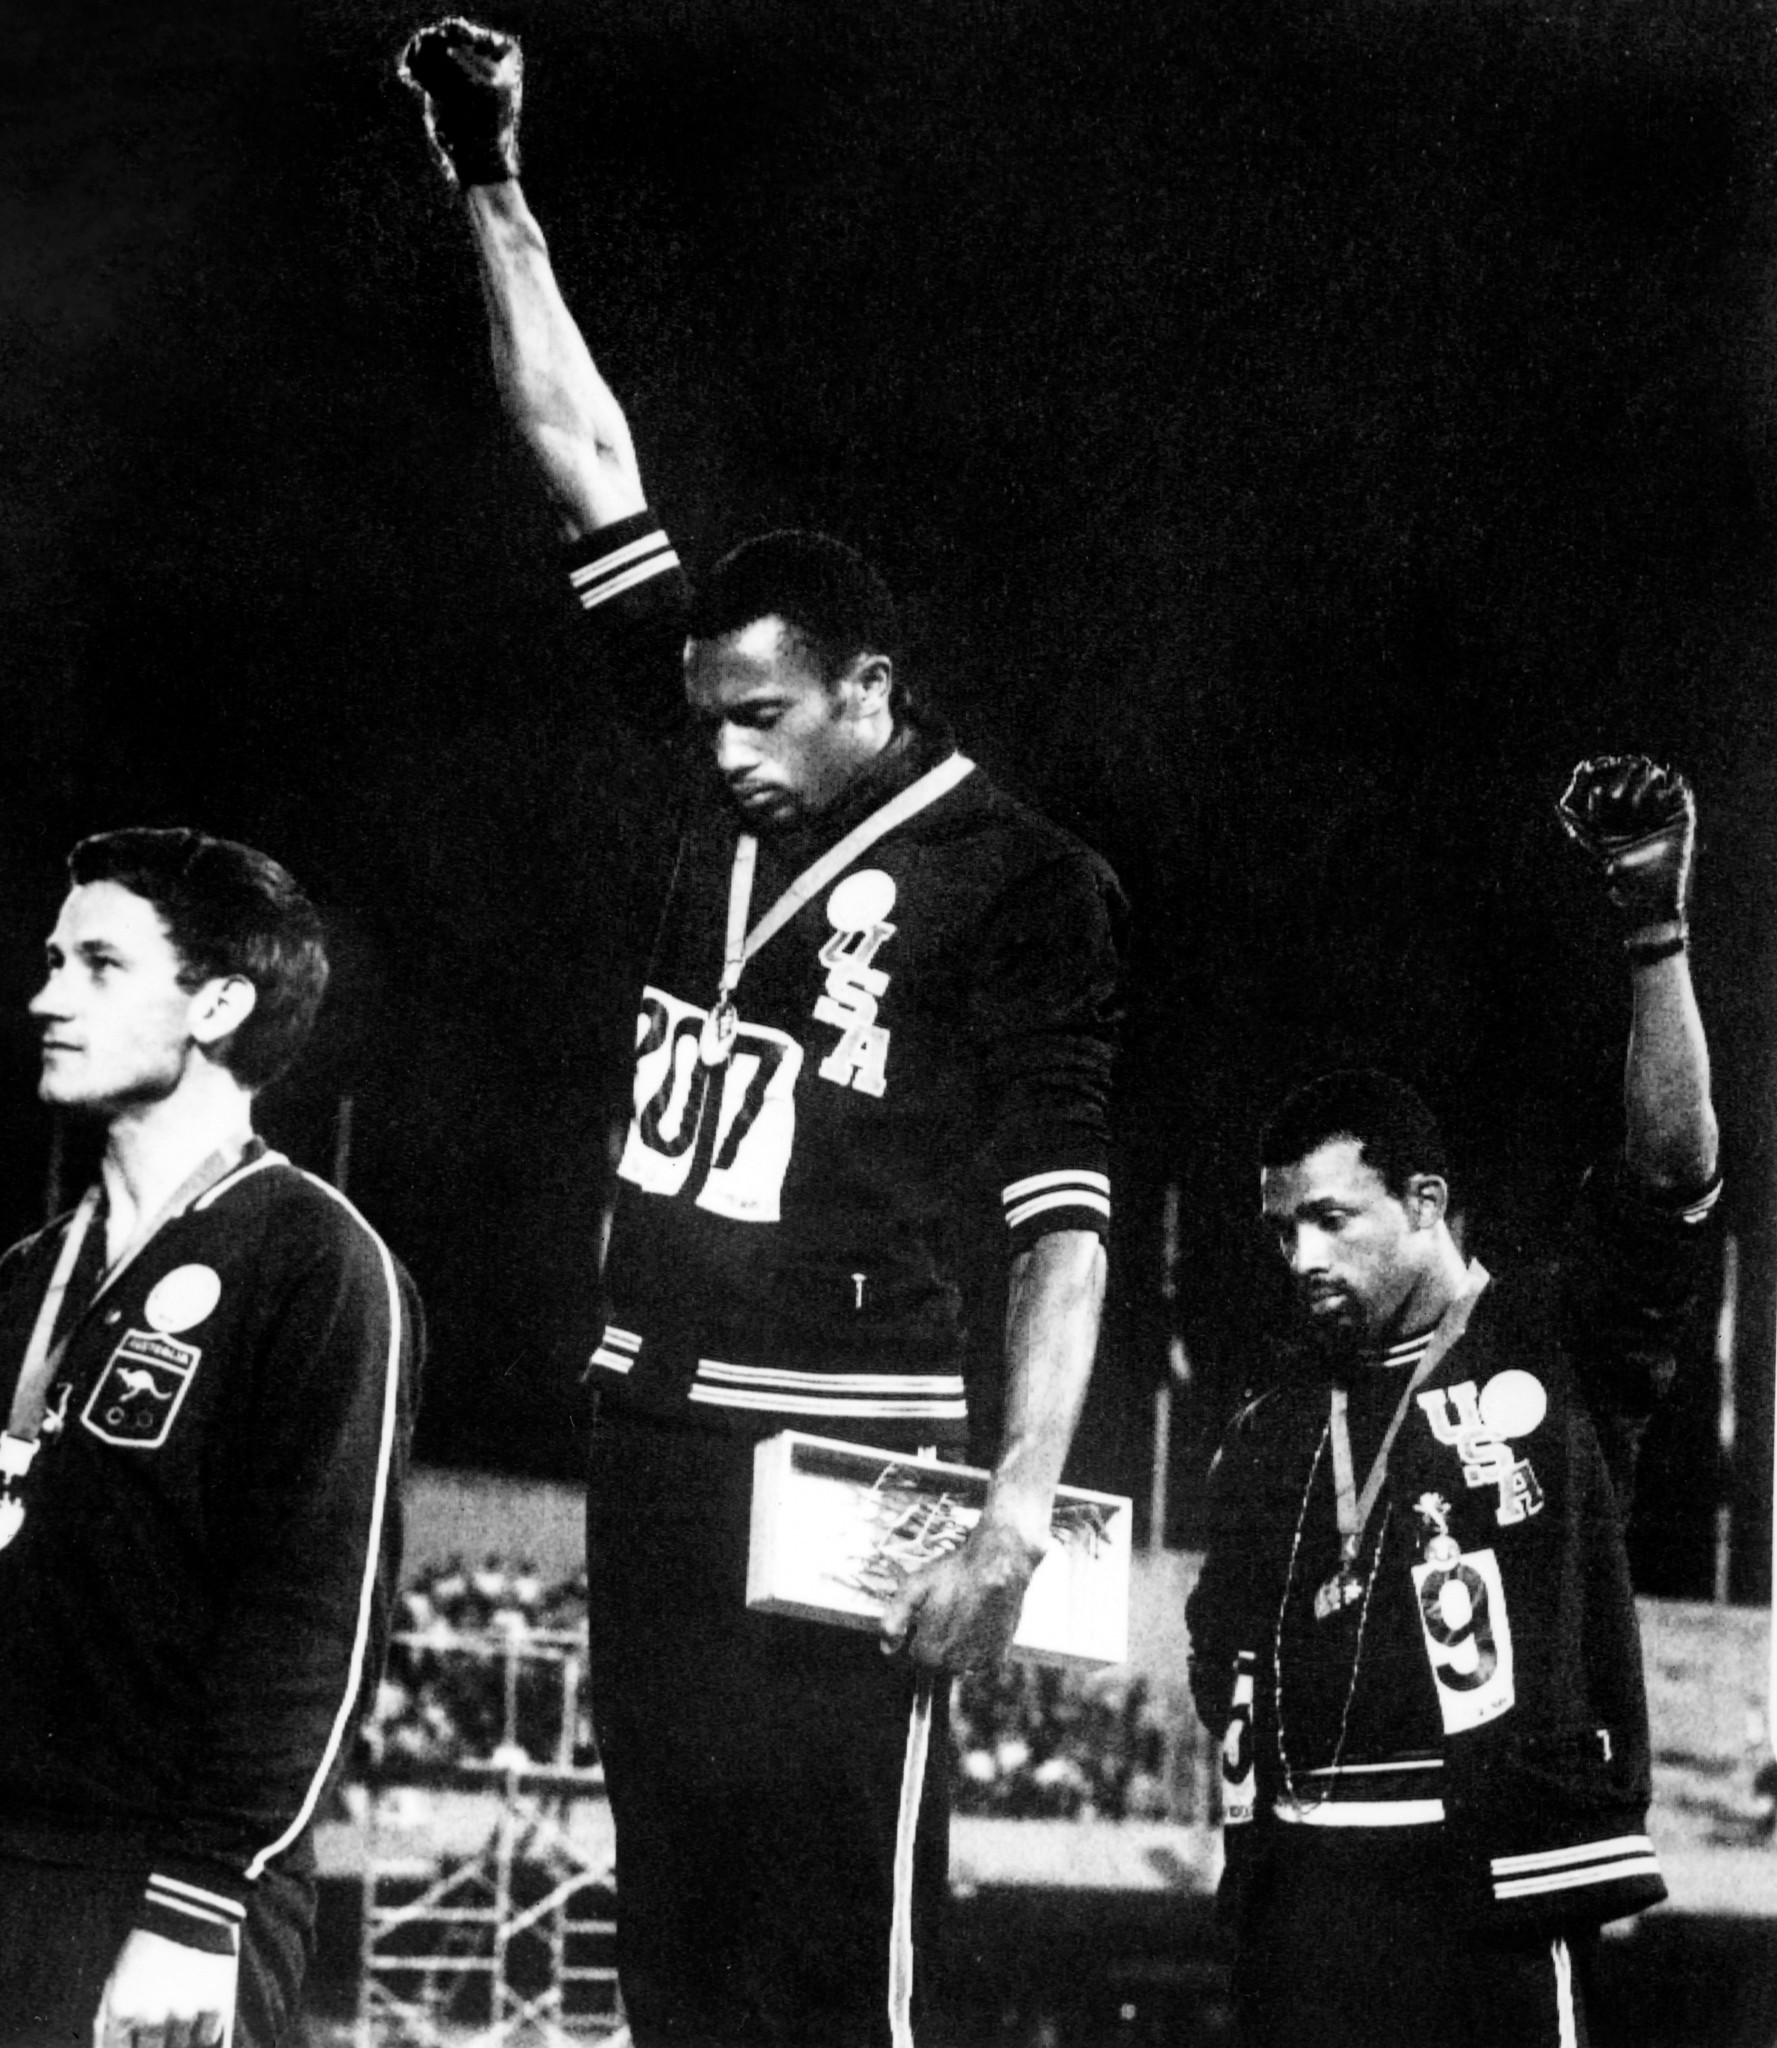 When Tommie Smith and John Carlos raised their fists in protest at the 1968 Summer Games, Australian runner Peter Norman stood by them. It lost him his career.